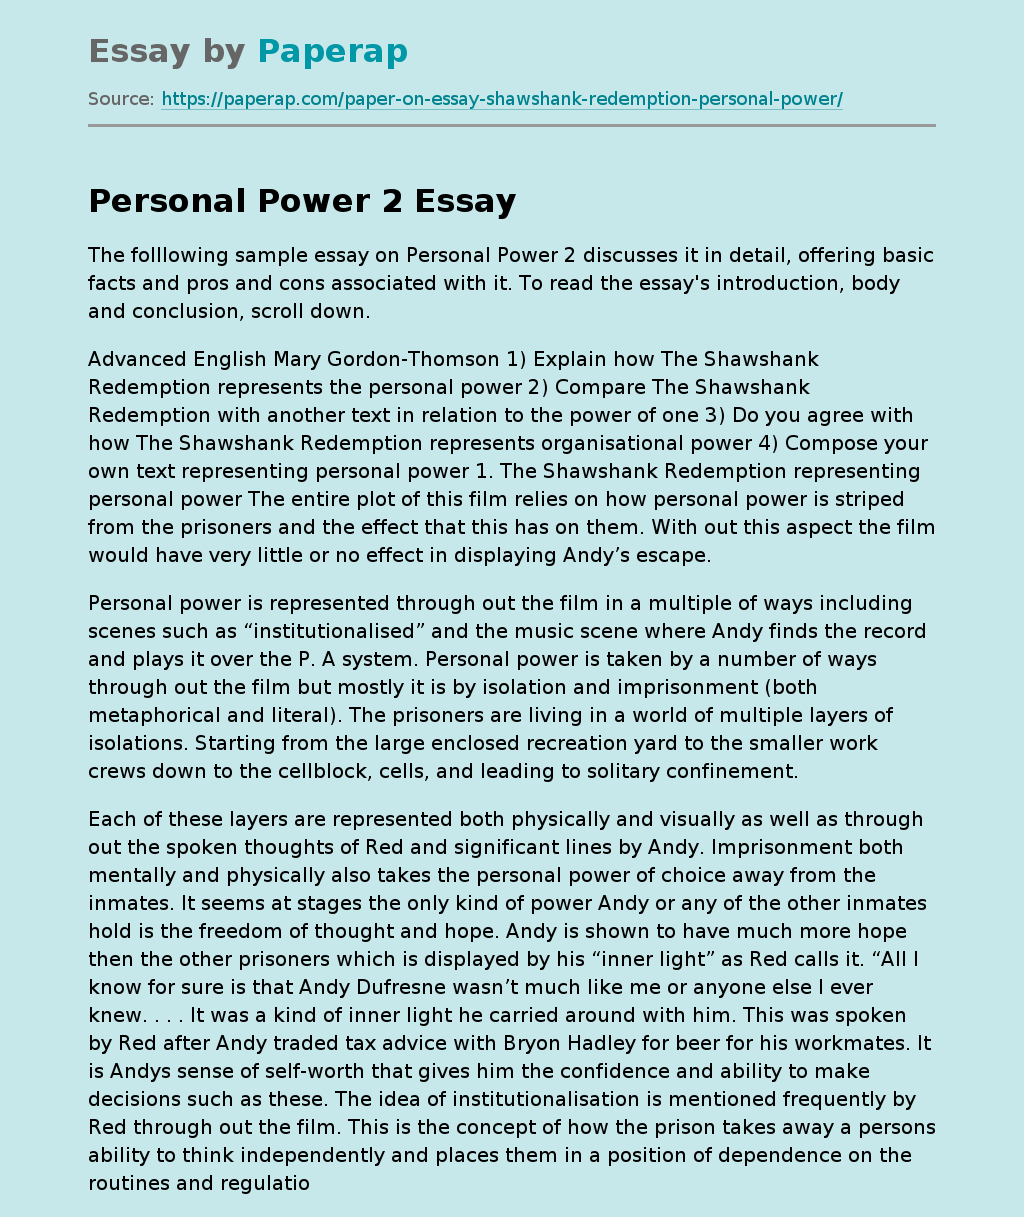 Personal Power 2